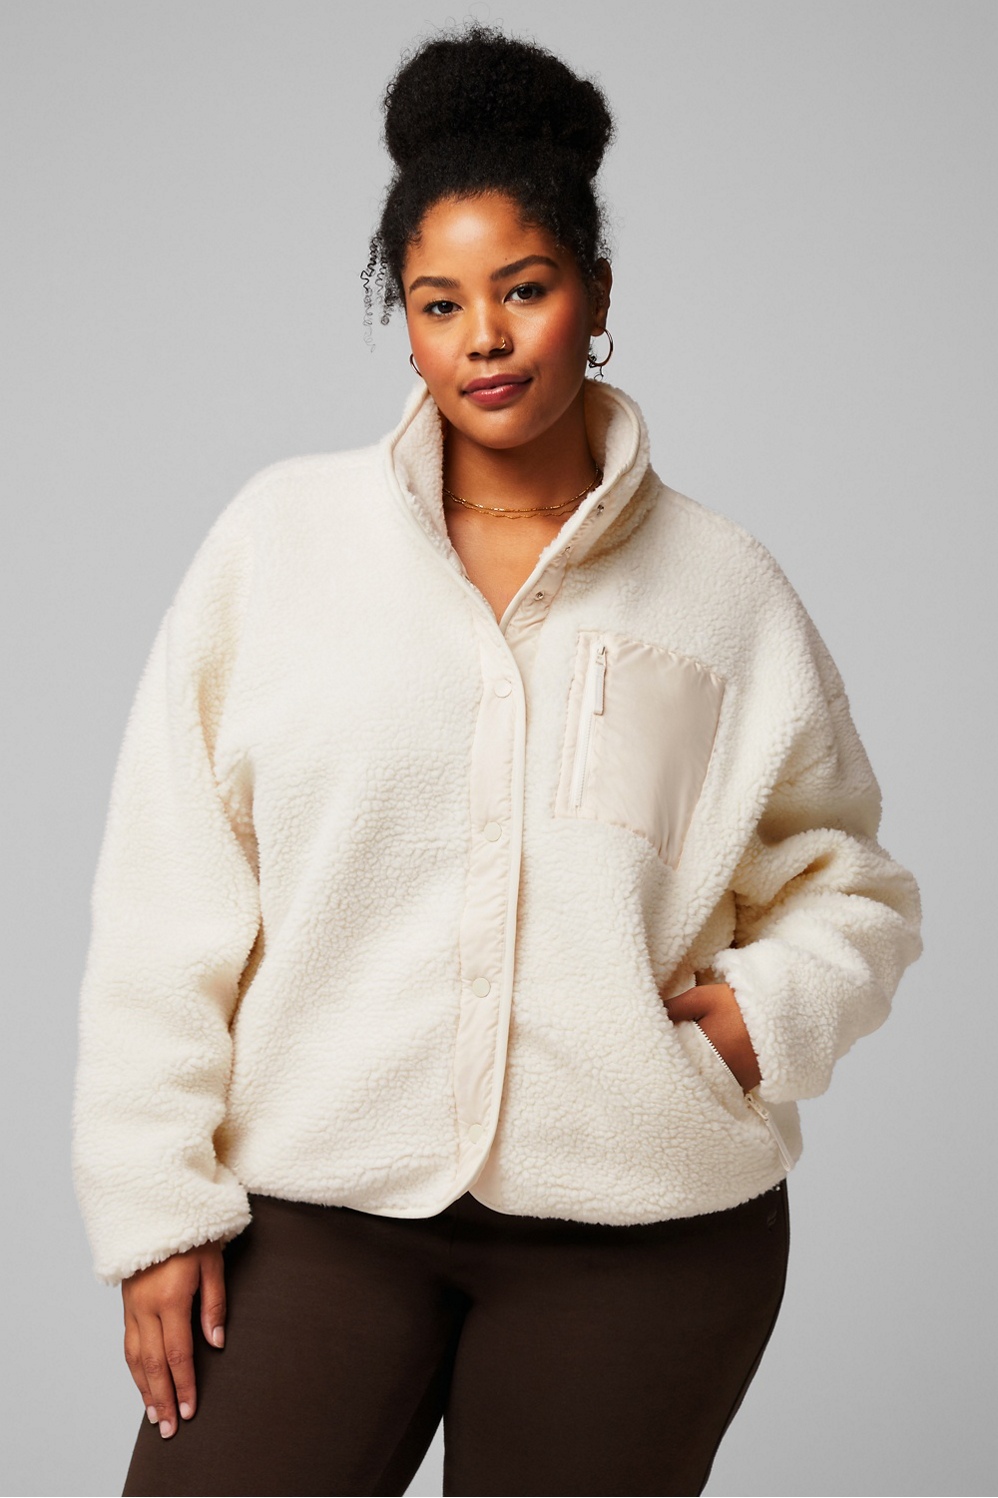 Fabletics Teddy Jacket White Size XS - $21 (75% Off Retail) New With Tags -  From Yurvani